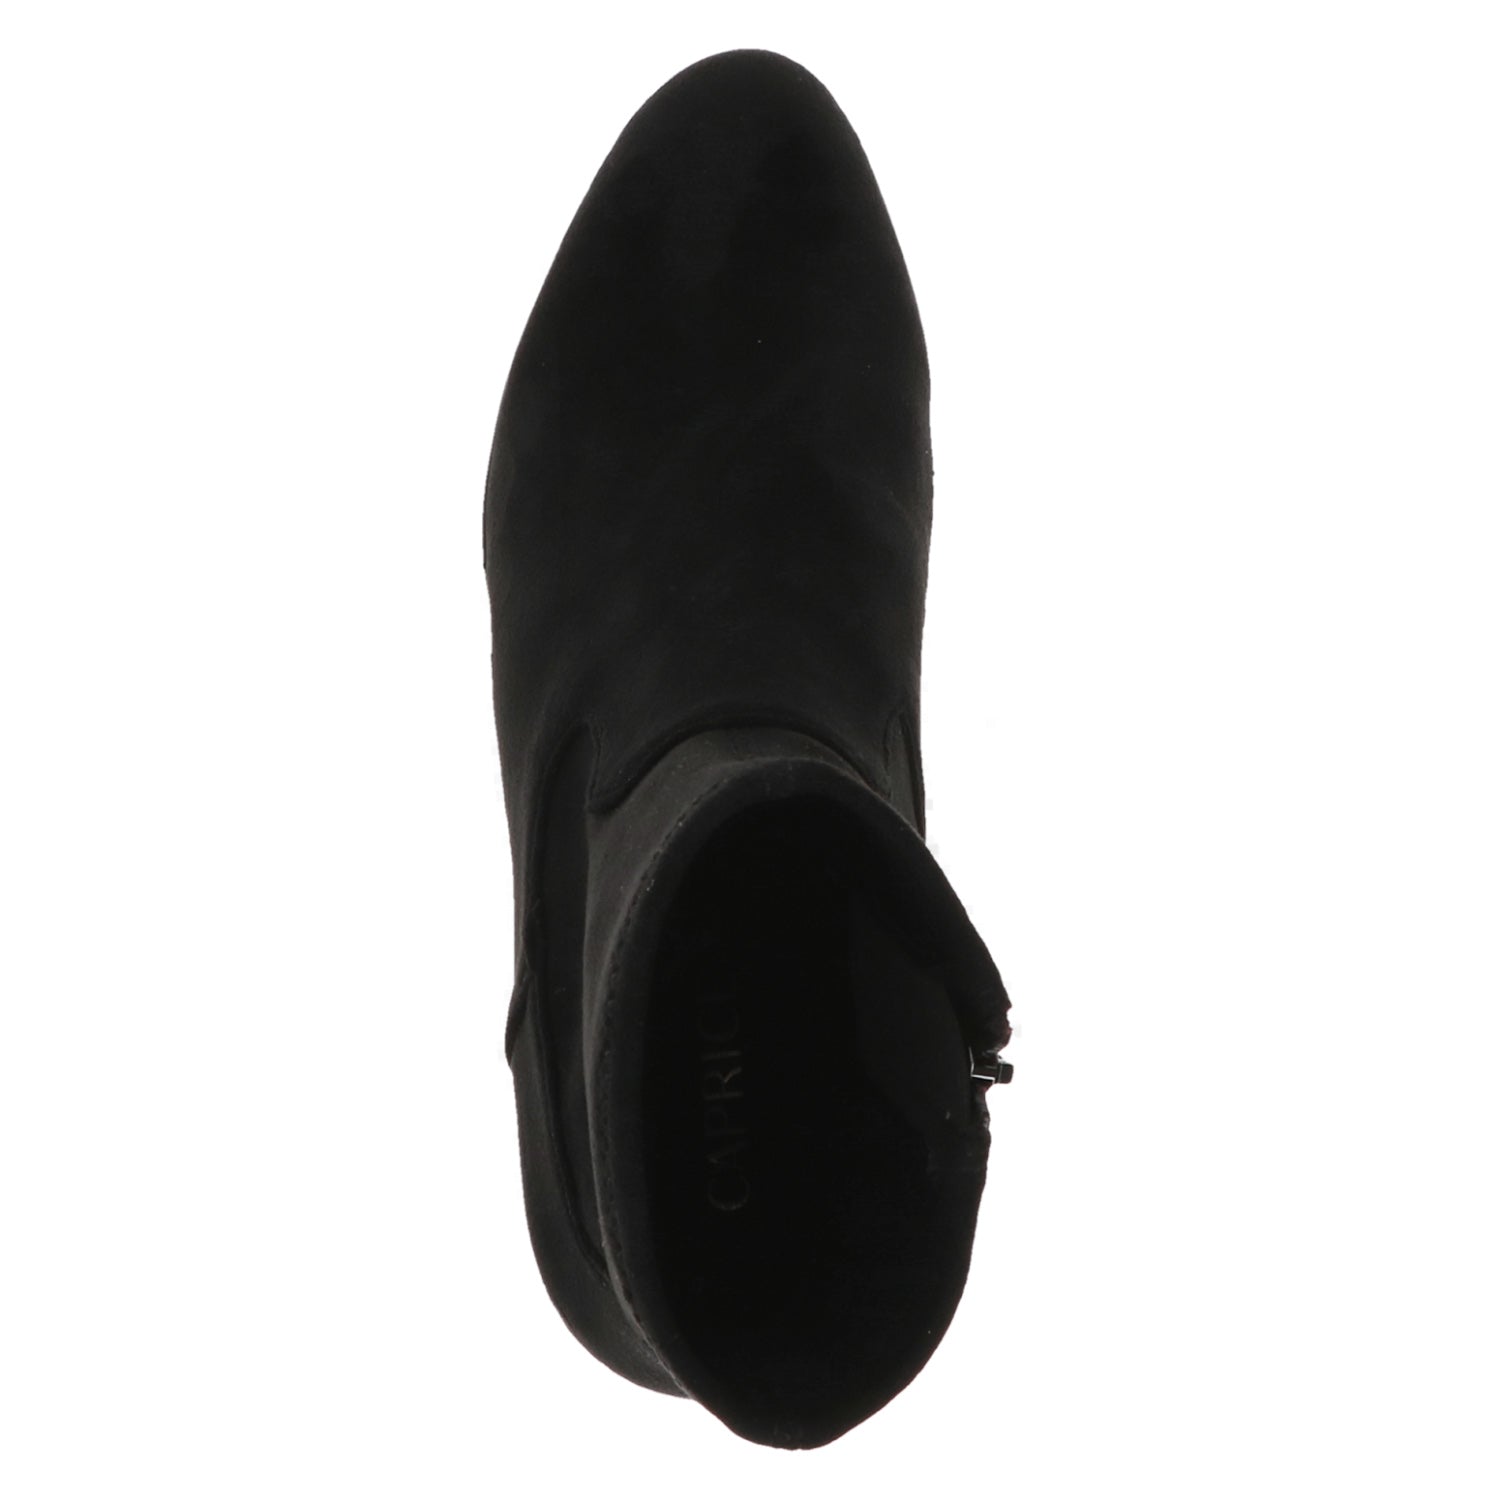 Detailed top view of the stylish black ankle boot.